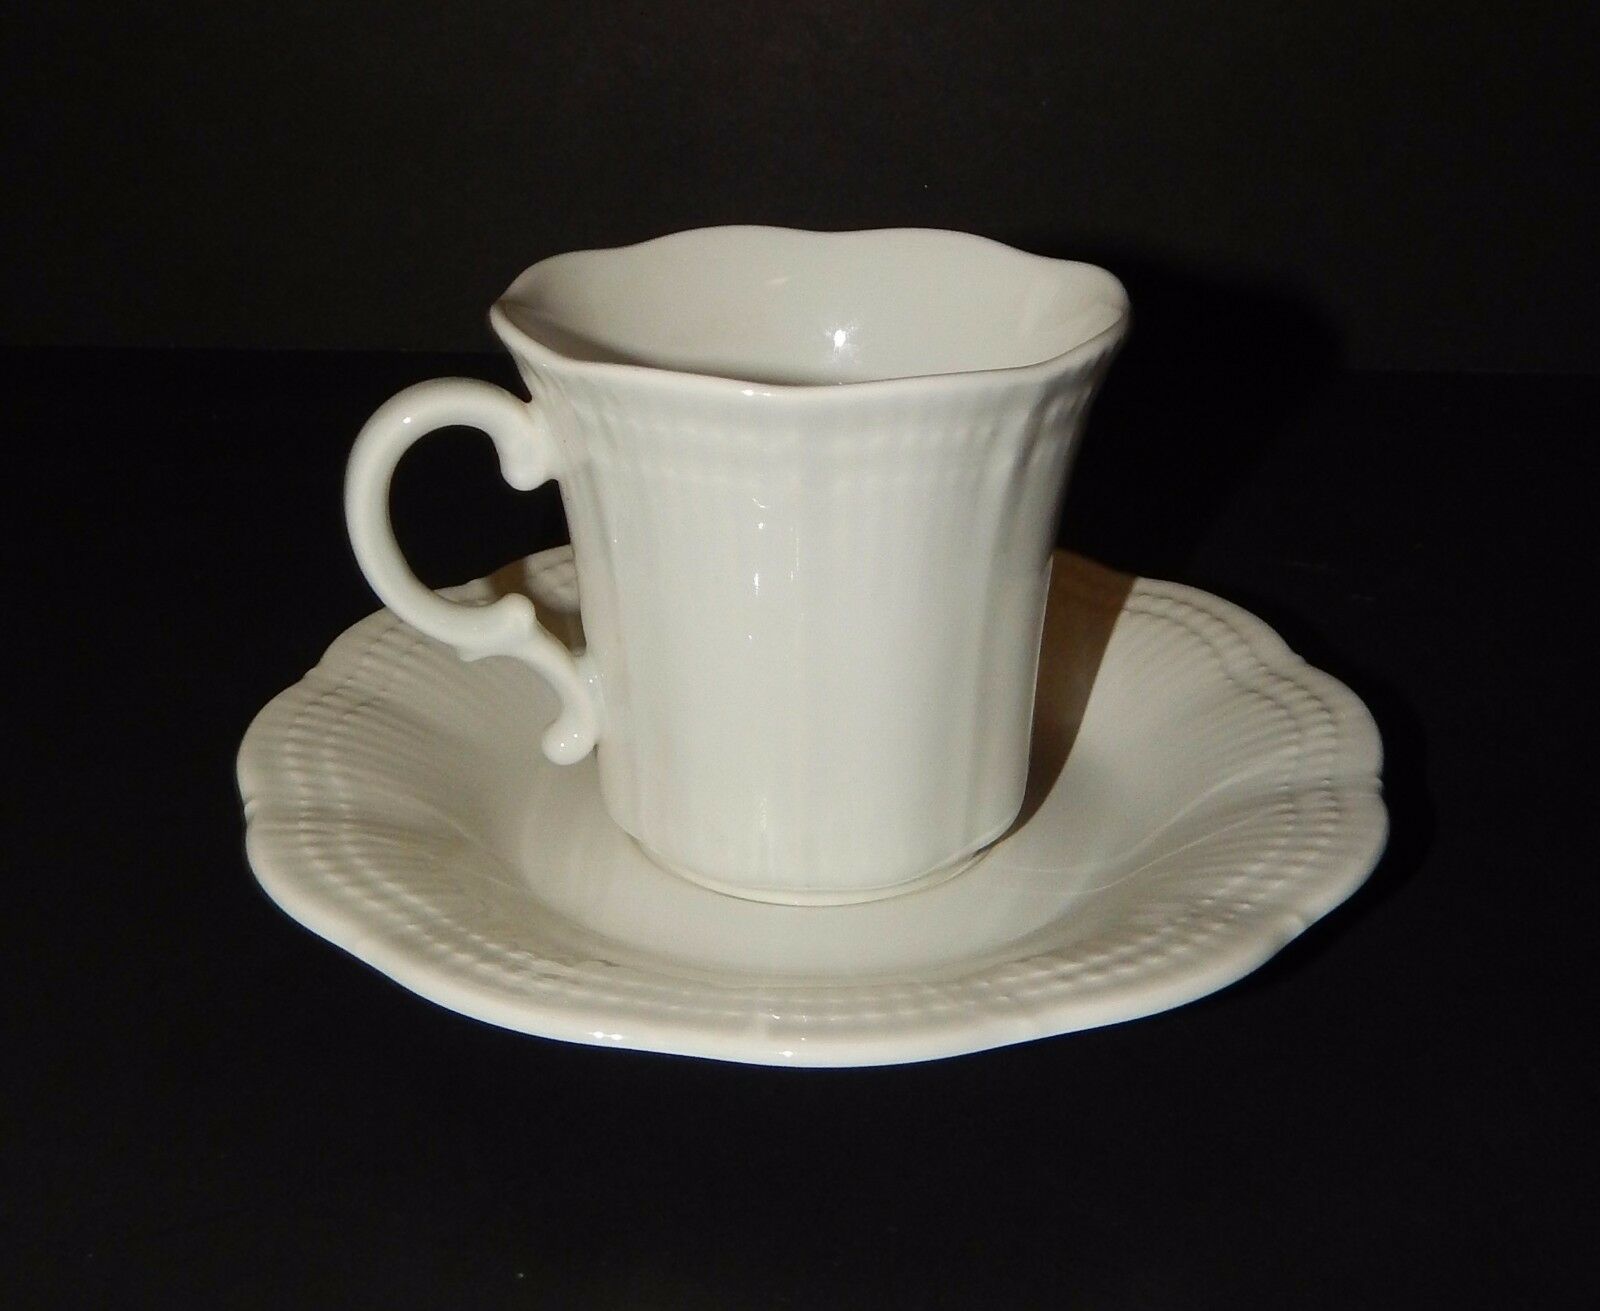 Primary image for Mikasa Allura White DH900 Coffee Tea Cup and Saucer New Scalloped Edge